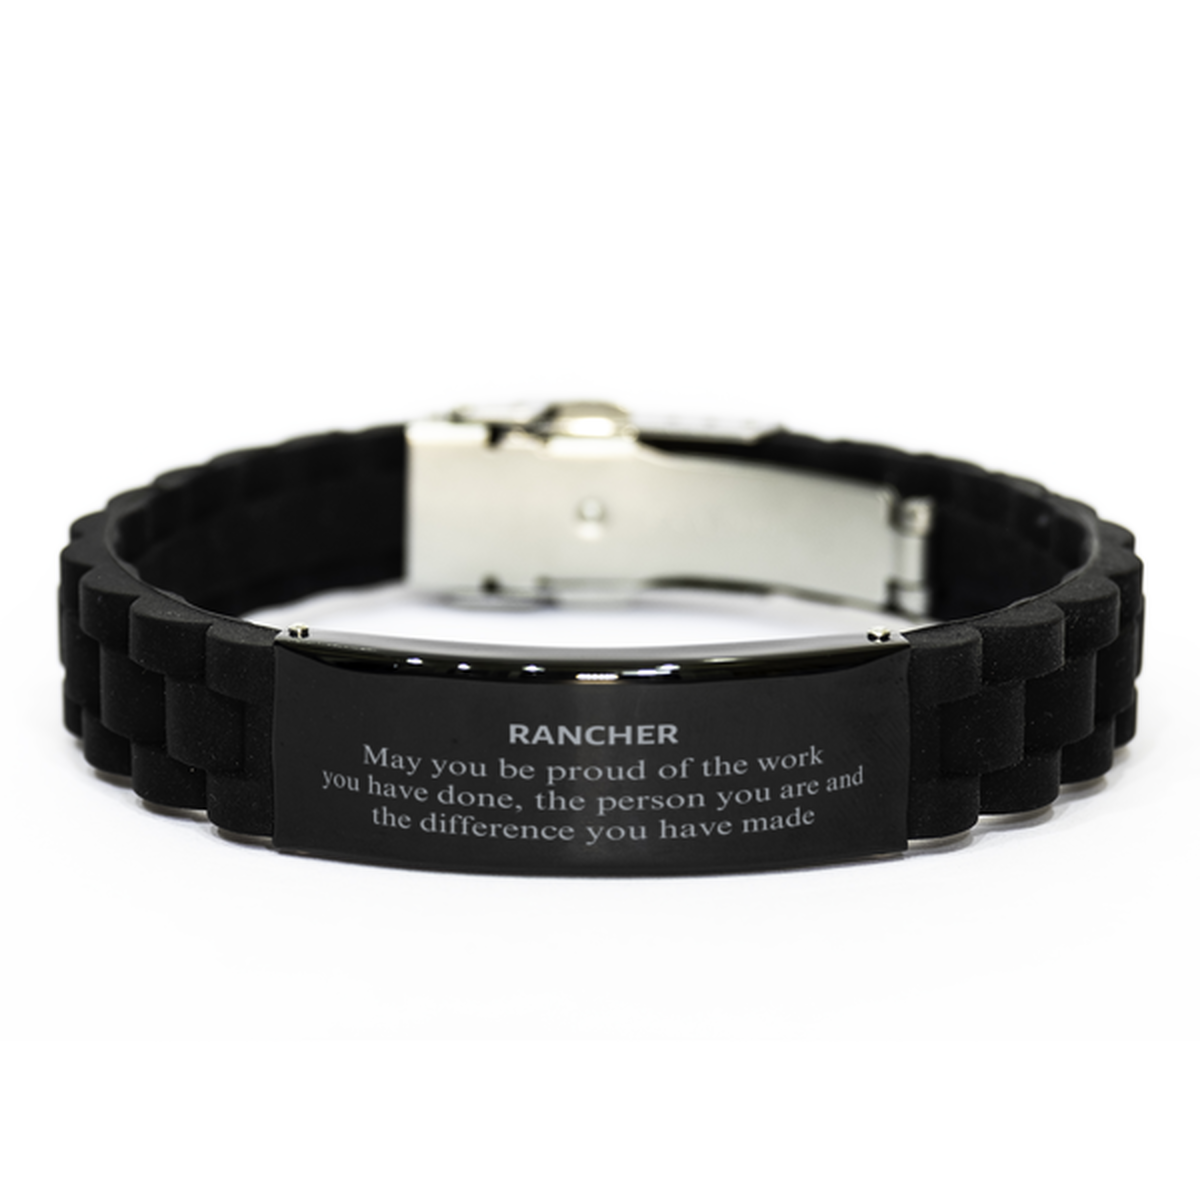 Rancher May you be proud of the work you have done, Retirement Rancher Black Glidelock Clasp Bracelet for Colleague Appreciation Gifts Amazing for Rancher